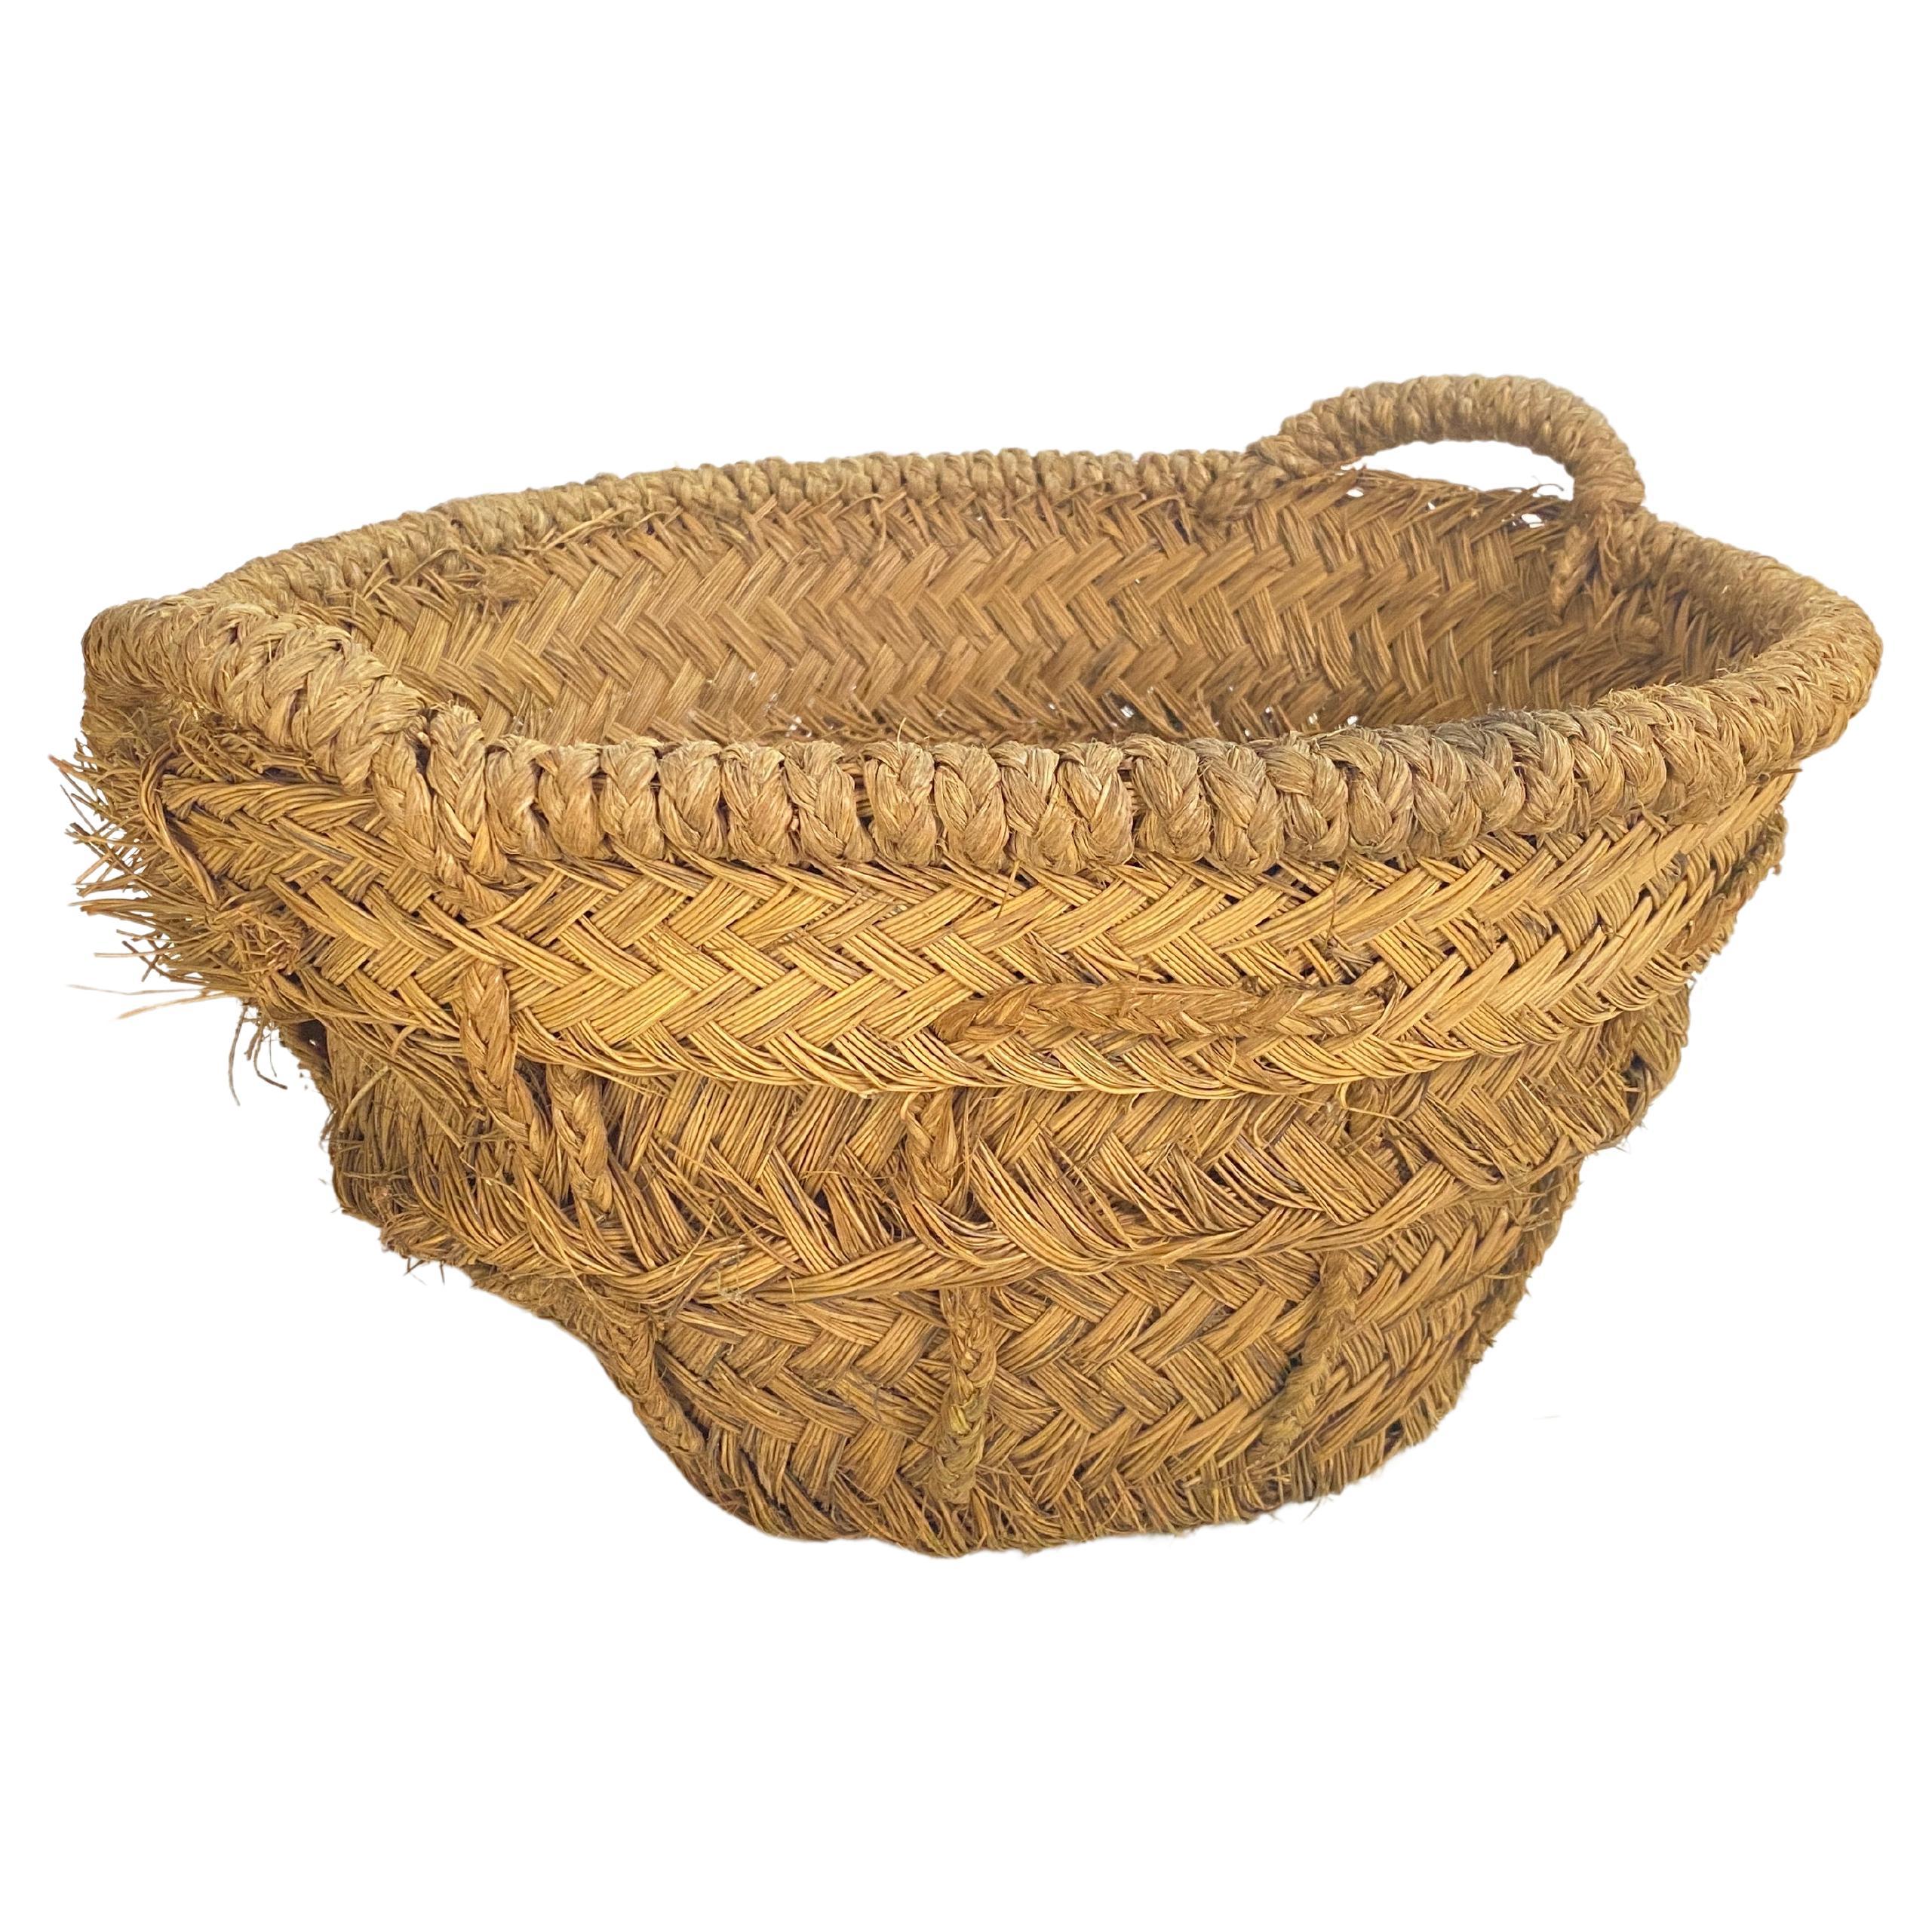  Korb in Rattan Rond Form Italien, Brown Farbe 1970